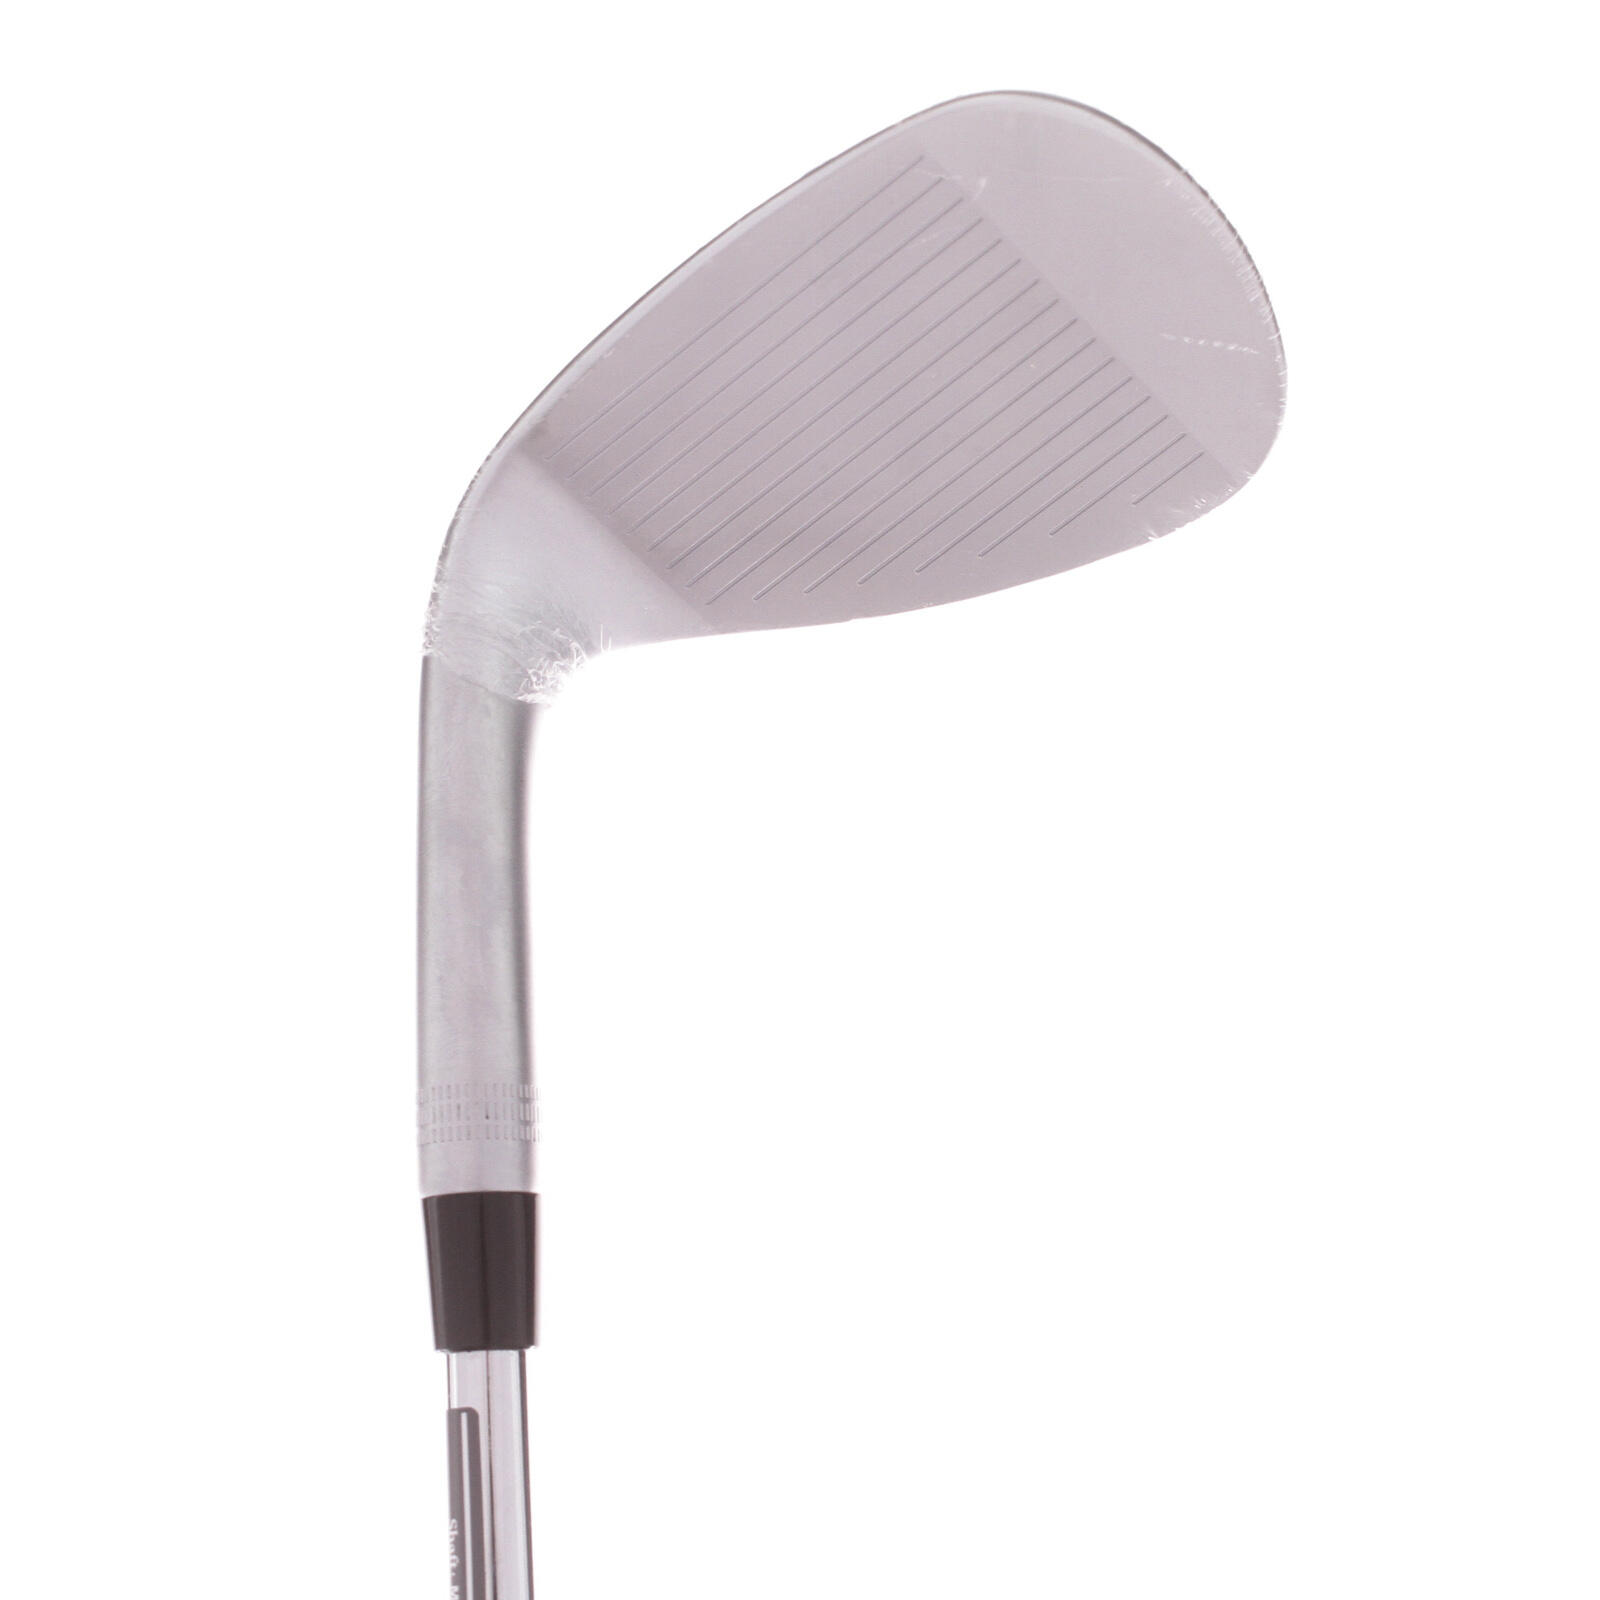 USED - Wedge Wilson Staff Staff Model Brand New 58* Steel Right Handed - GRADE A 2/5